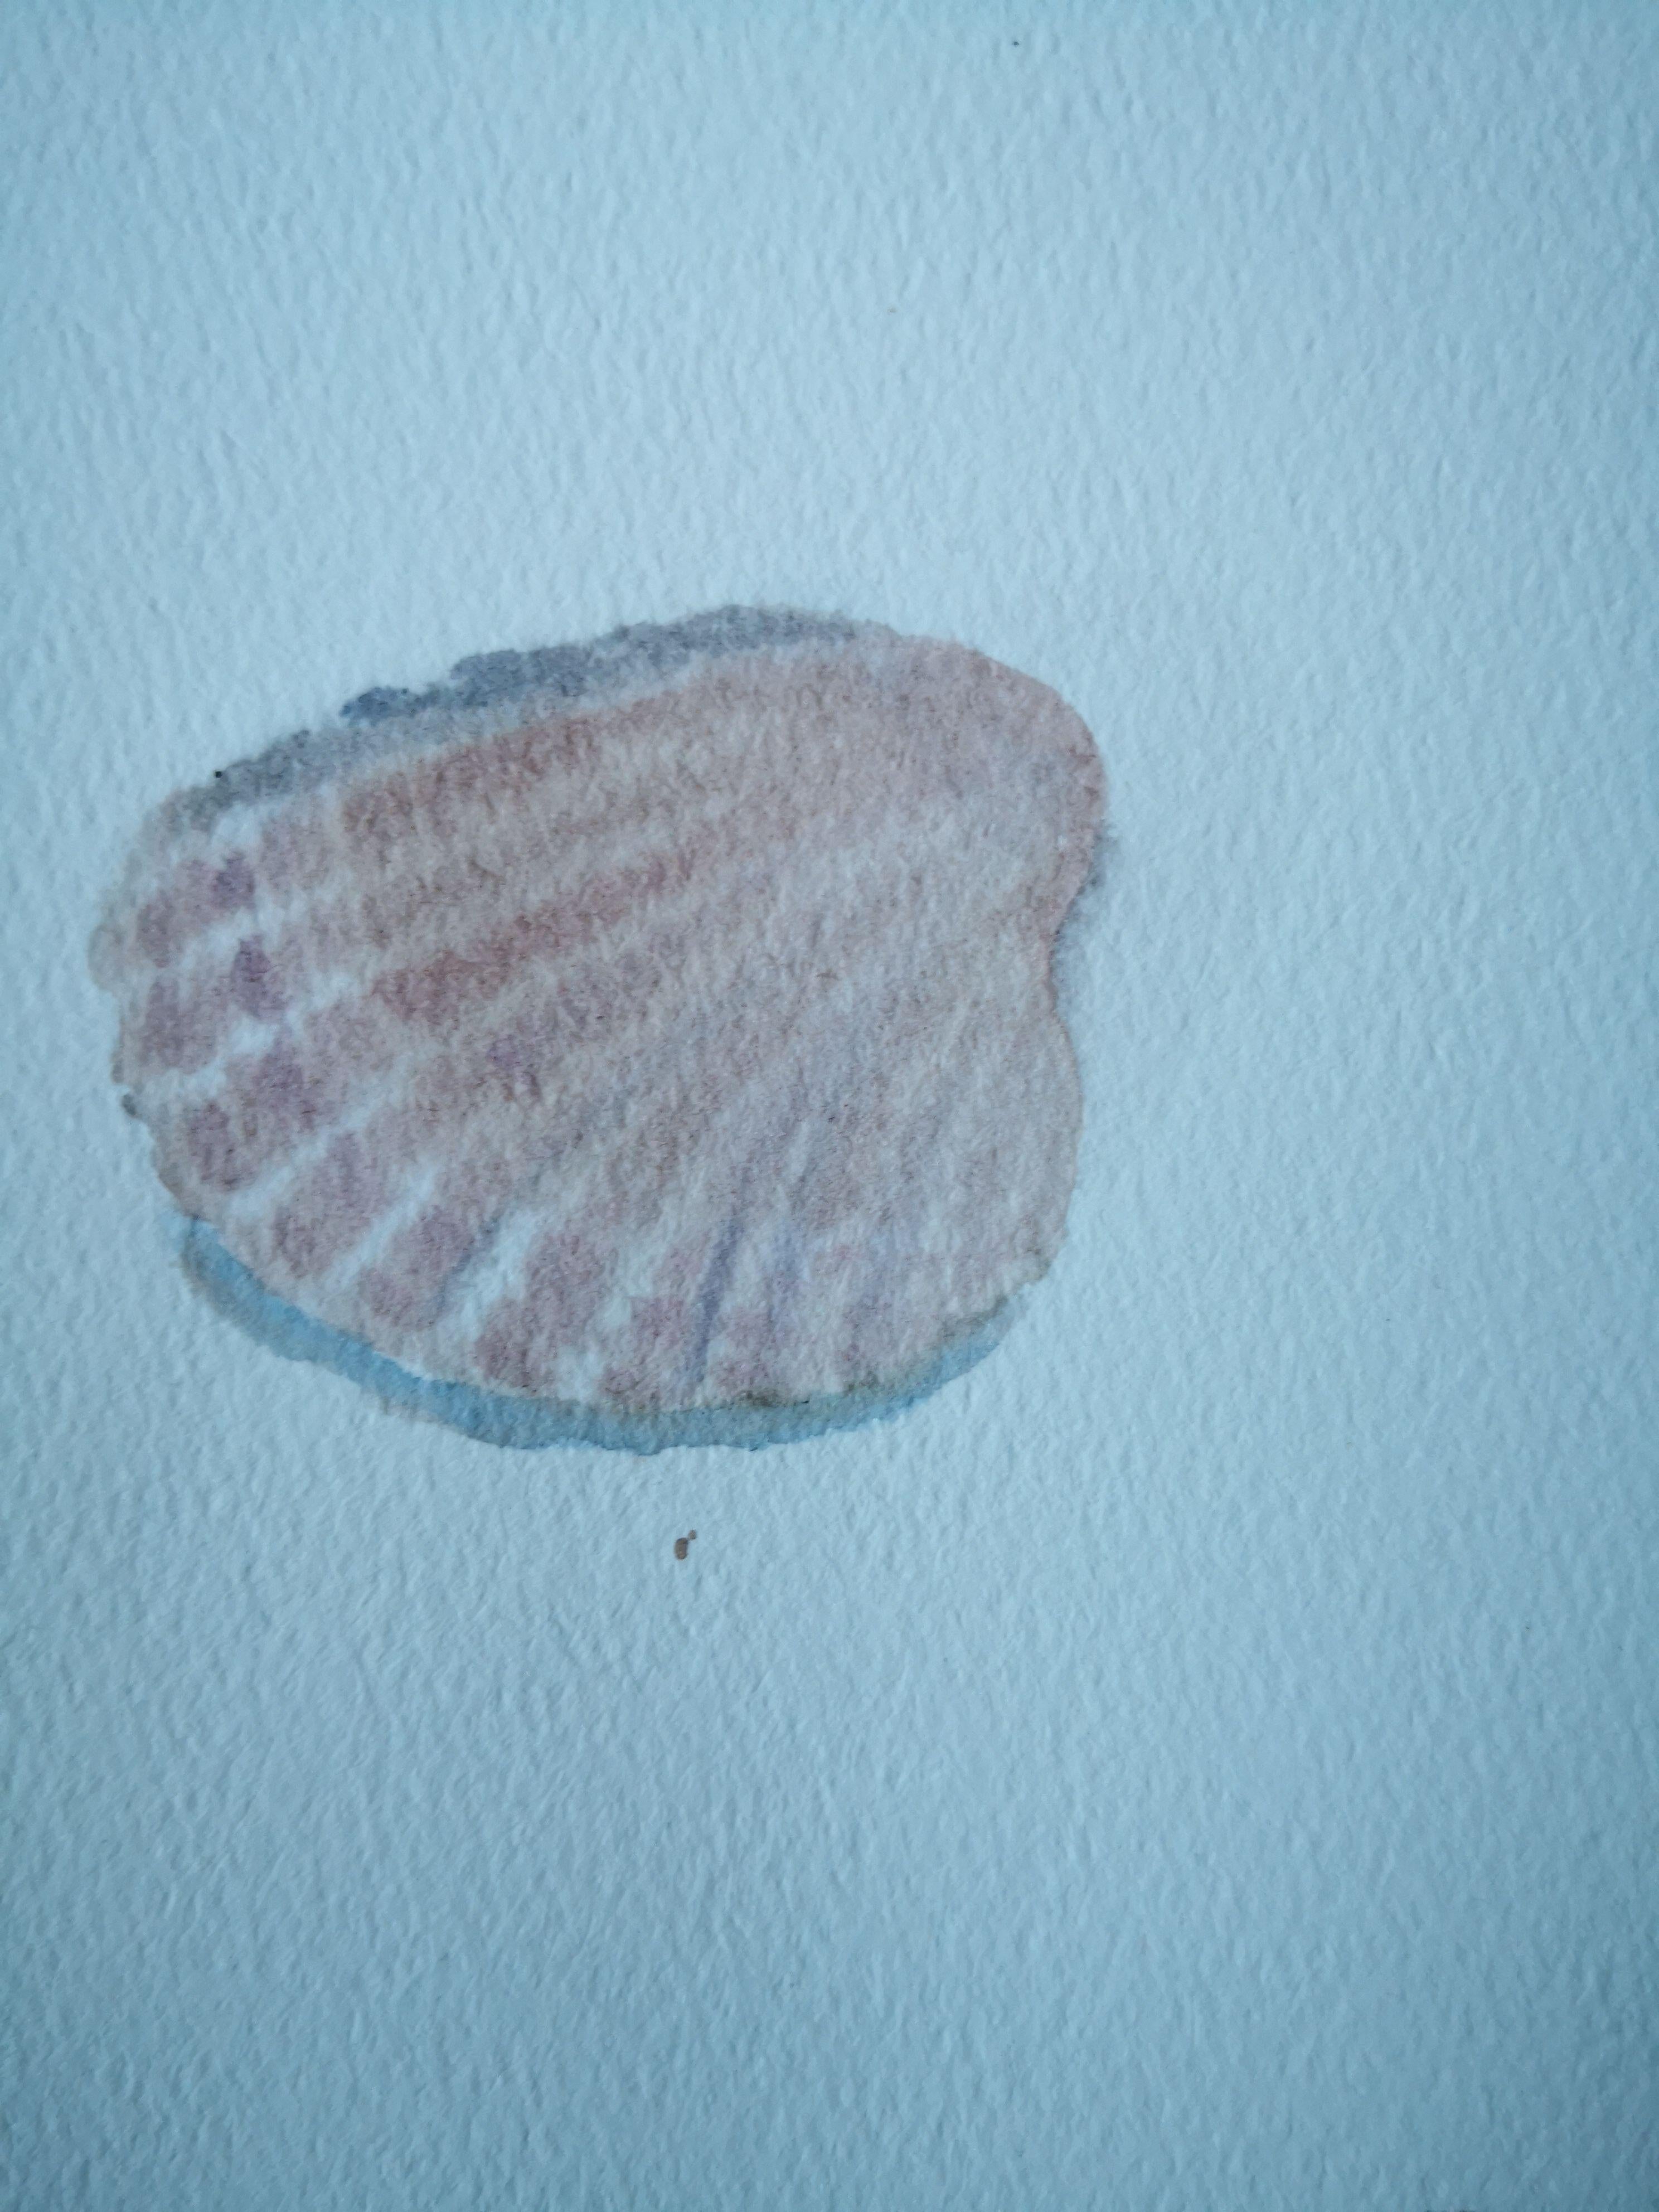 Watercolor work on archival quality paper. A simple watercolor study using things found around the house and a collection of shells. :: Painting :: Contemporary :: This piece comes with an official certificate of authenticity signed by the artist ::